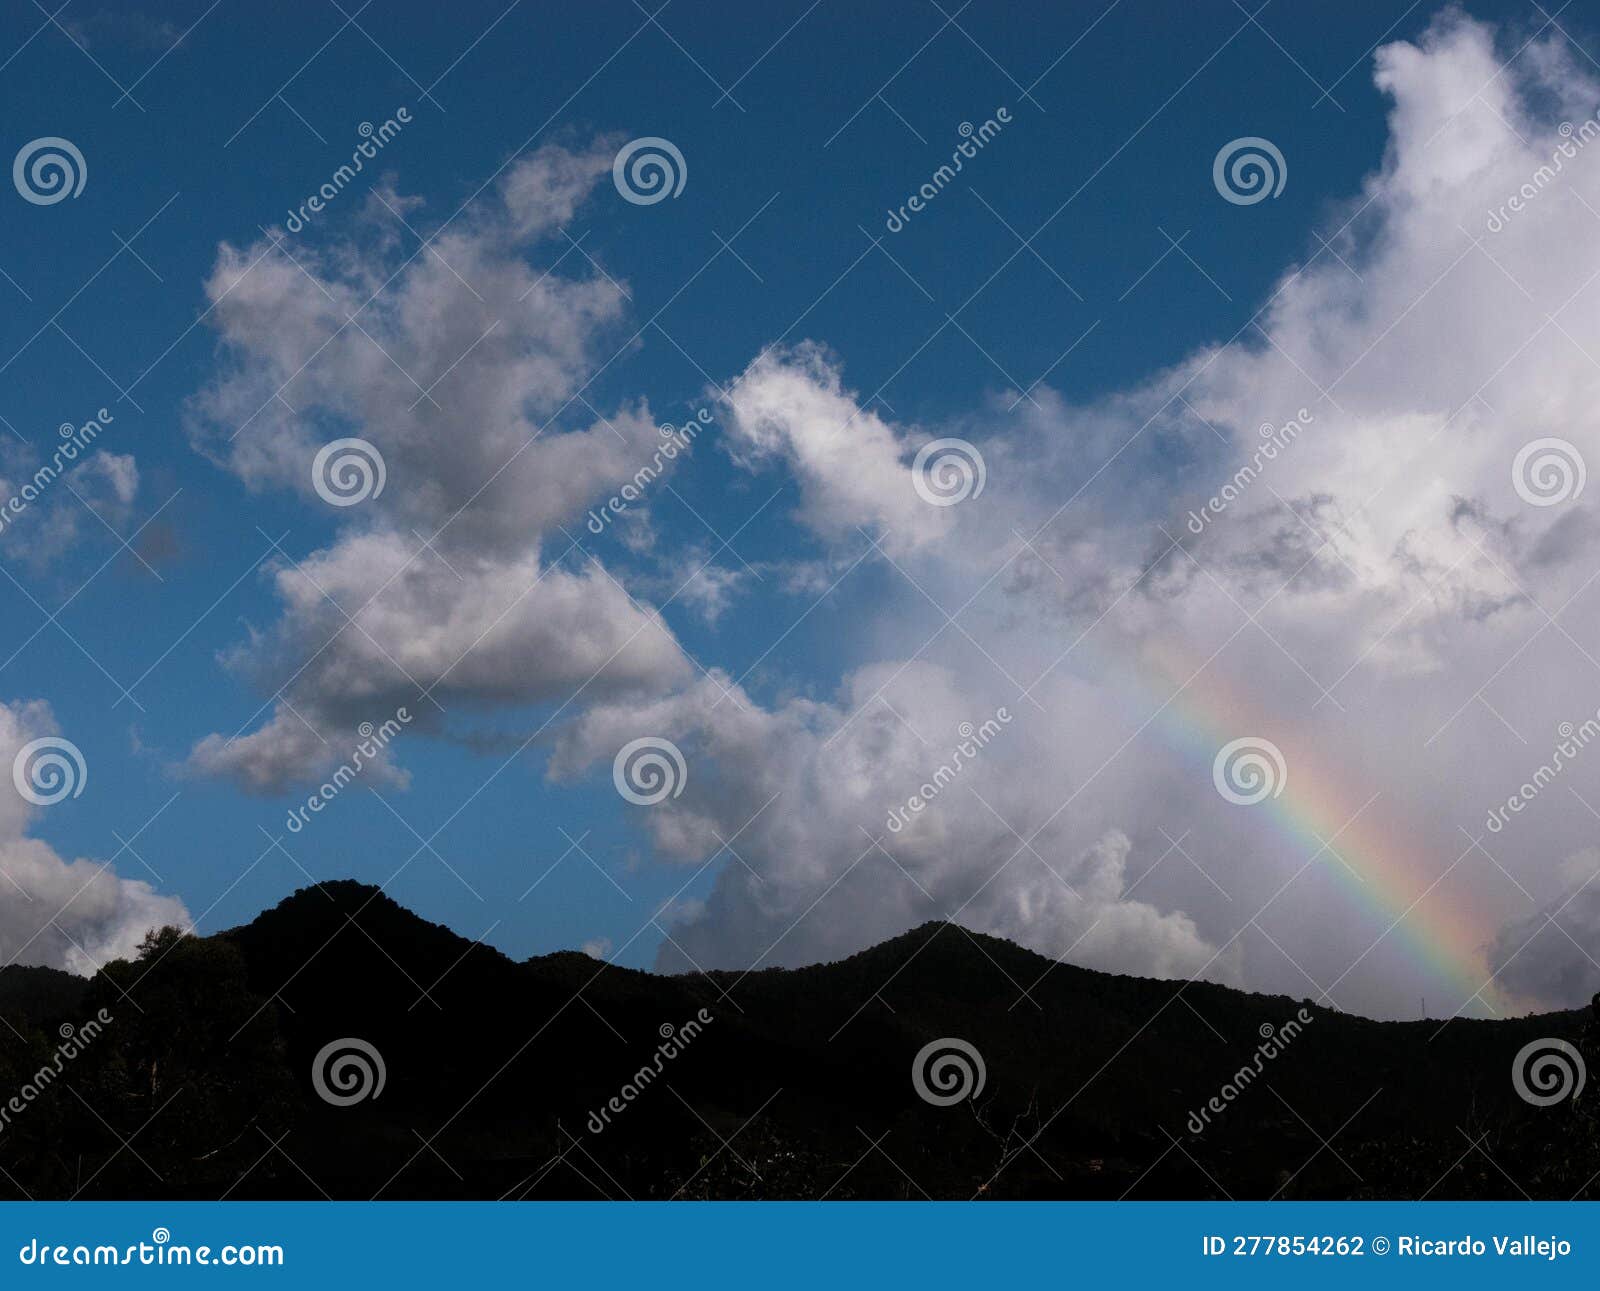 silhouette of mountain with rainbow and clouds